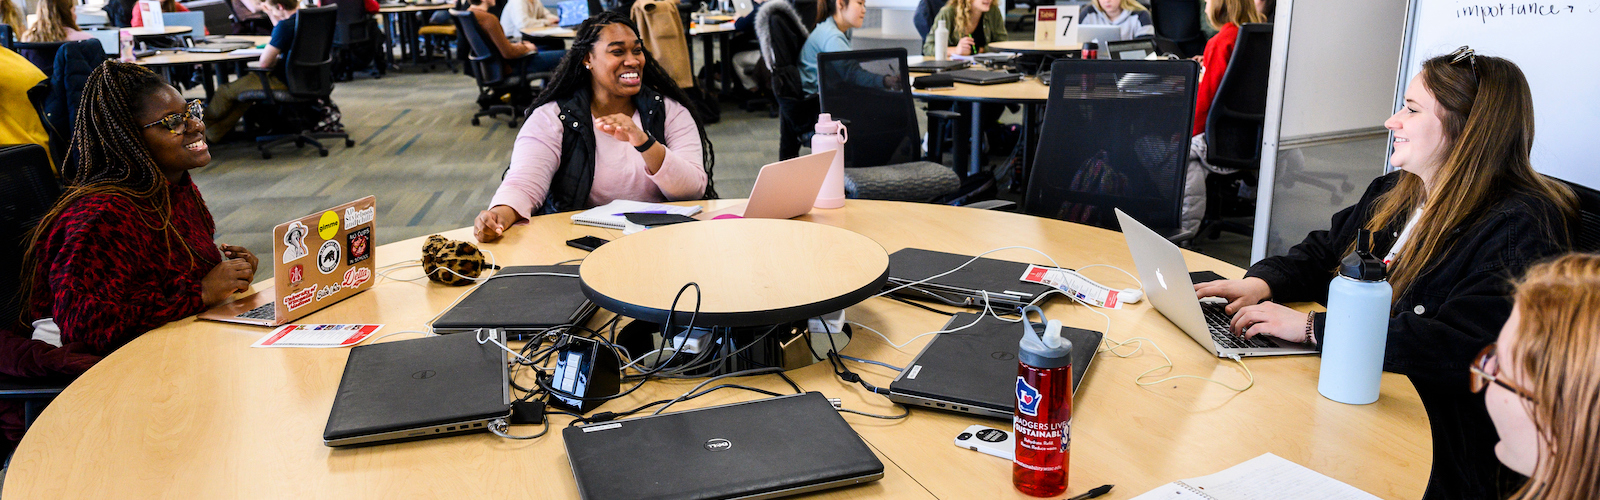 Four students sitting around a table with laptops smiling at one another.